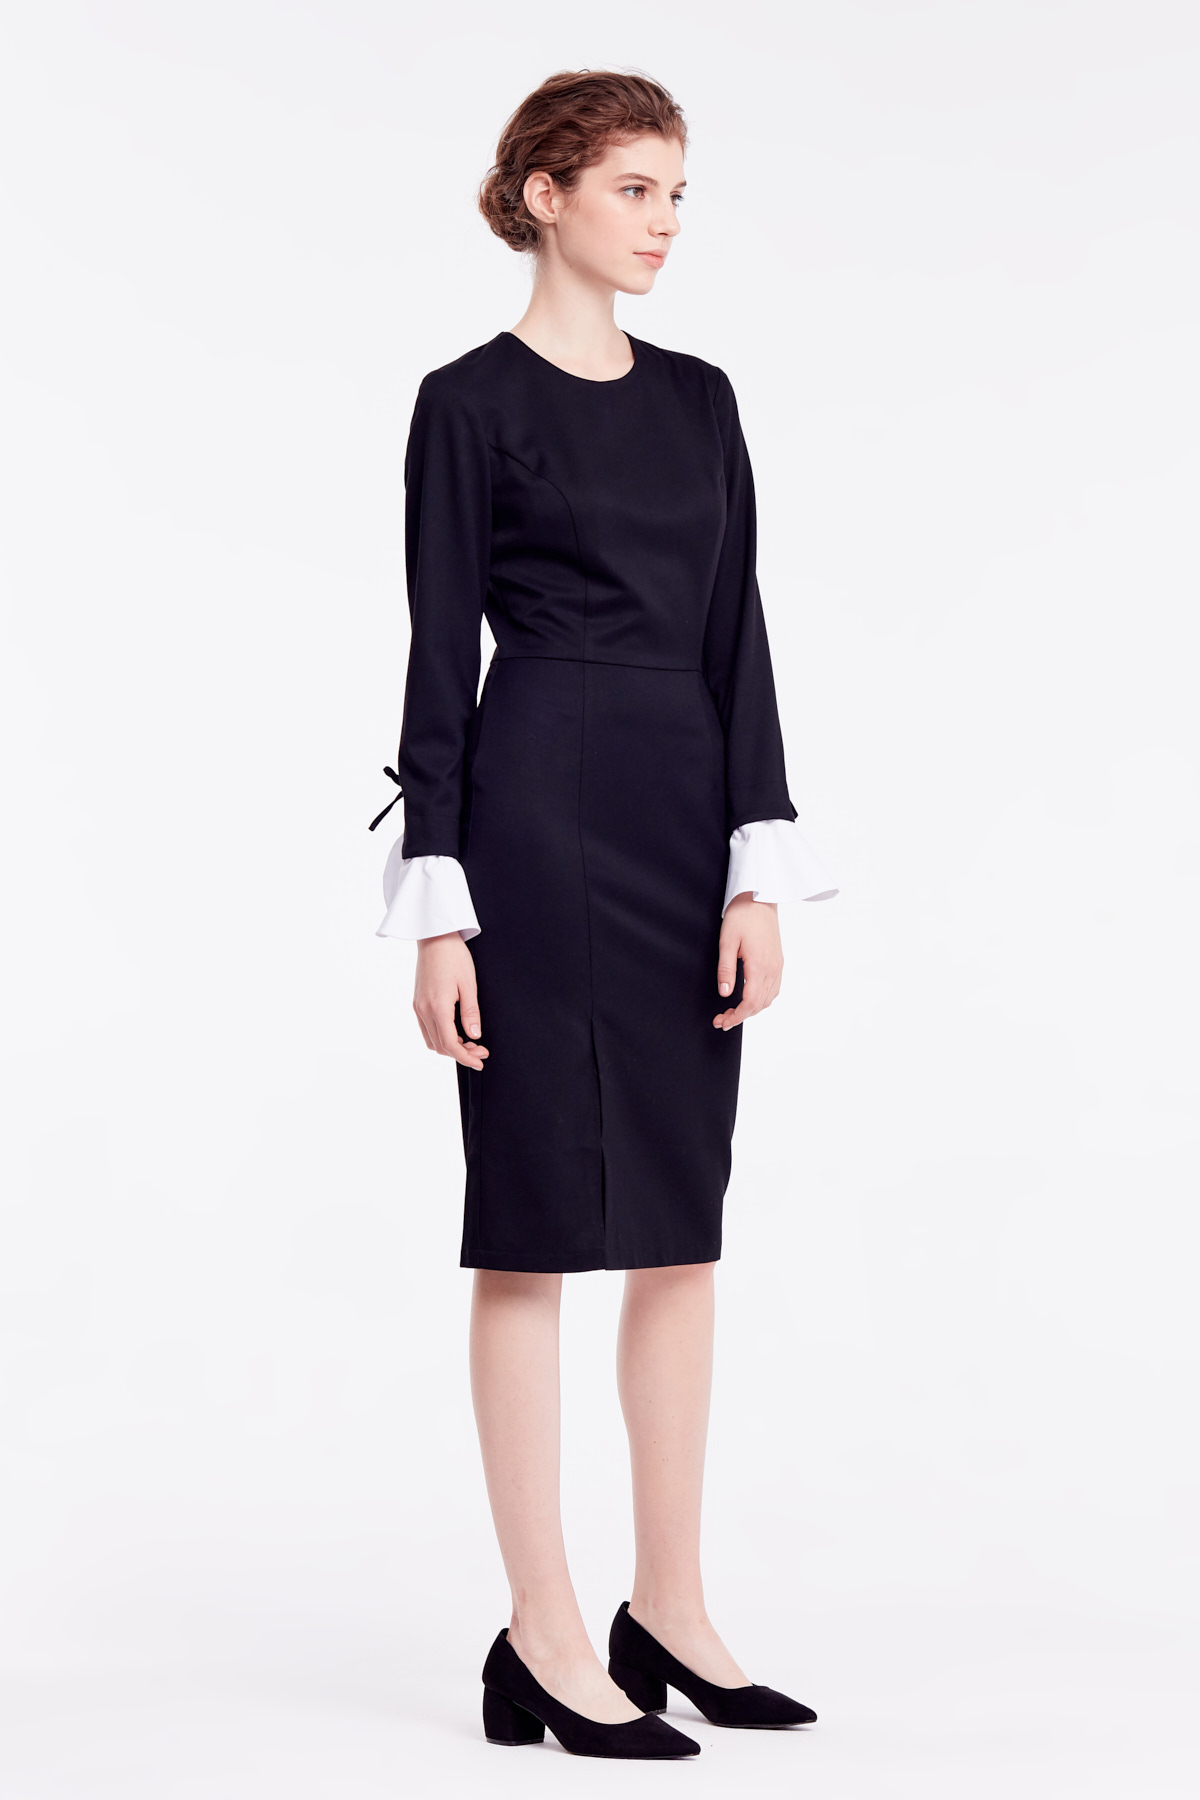 Black column dress with white cuffs on sleeves, photo 5